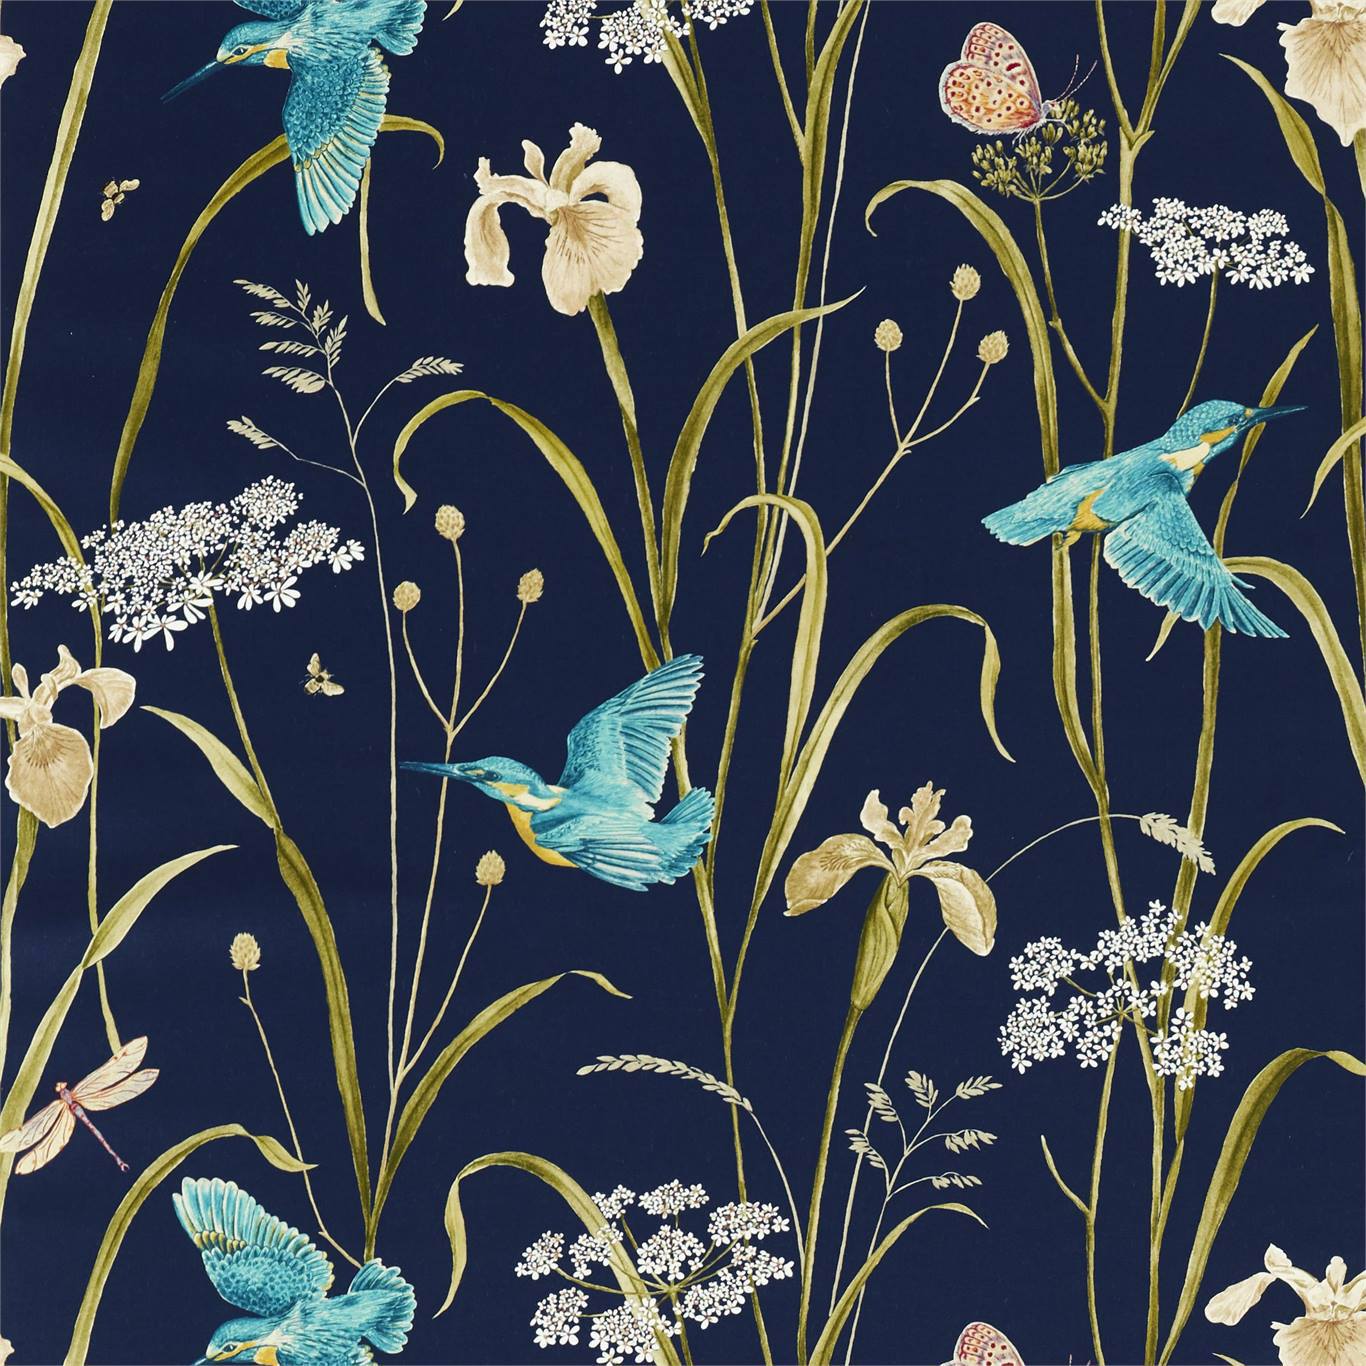 Kingfisher and Iris Navy/Teal Fabric By Sanderson